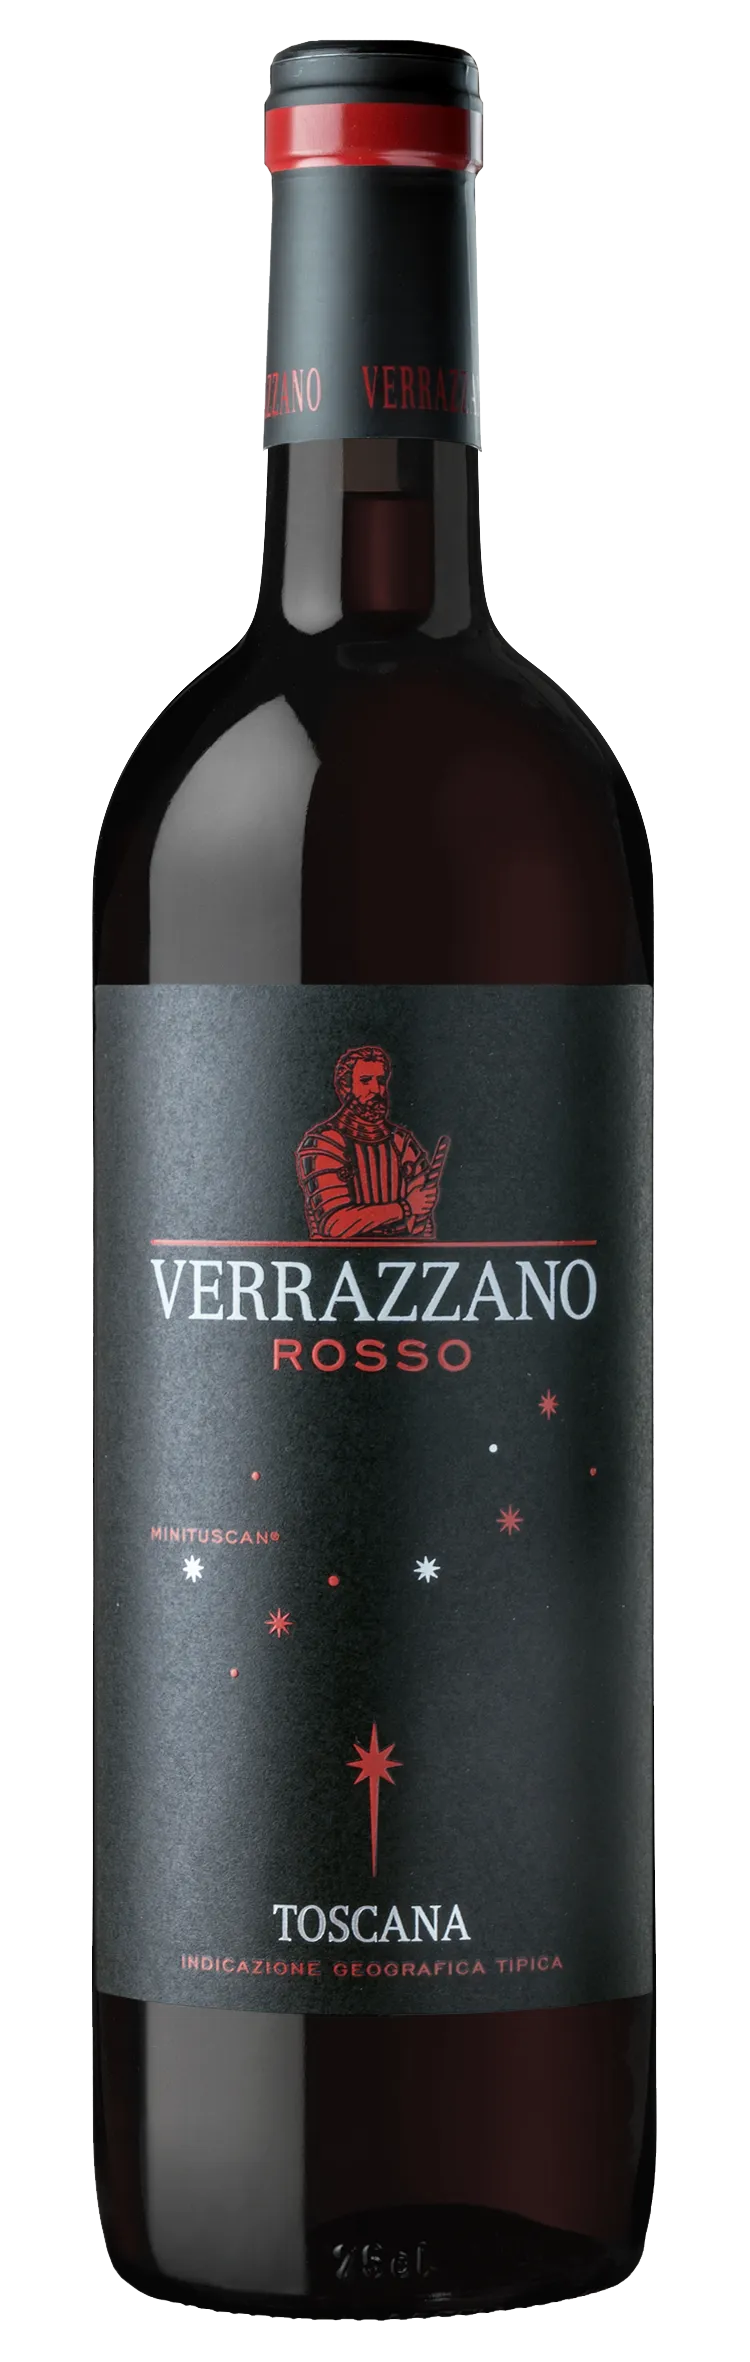 Bottle of Verrazzano Toscana Rosso from search results